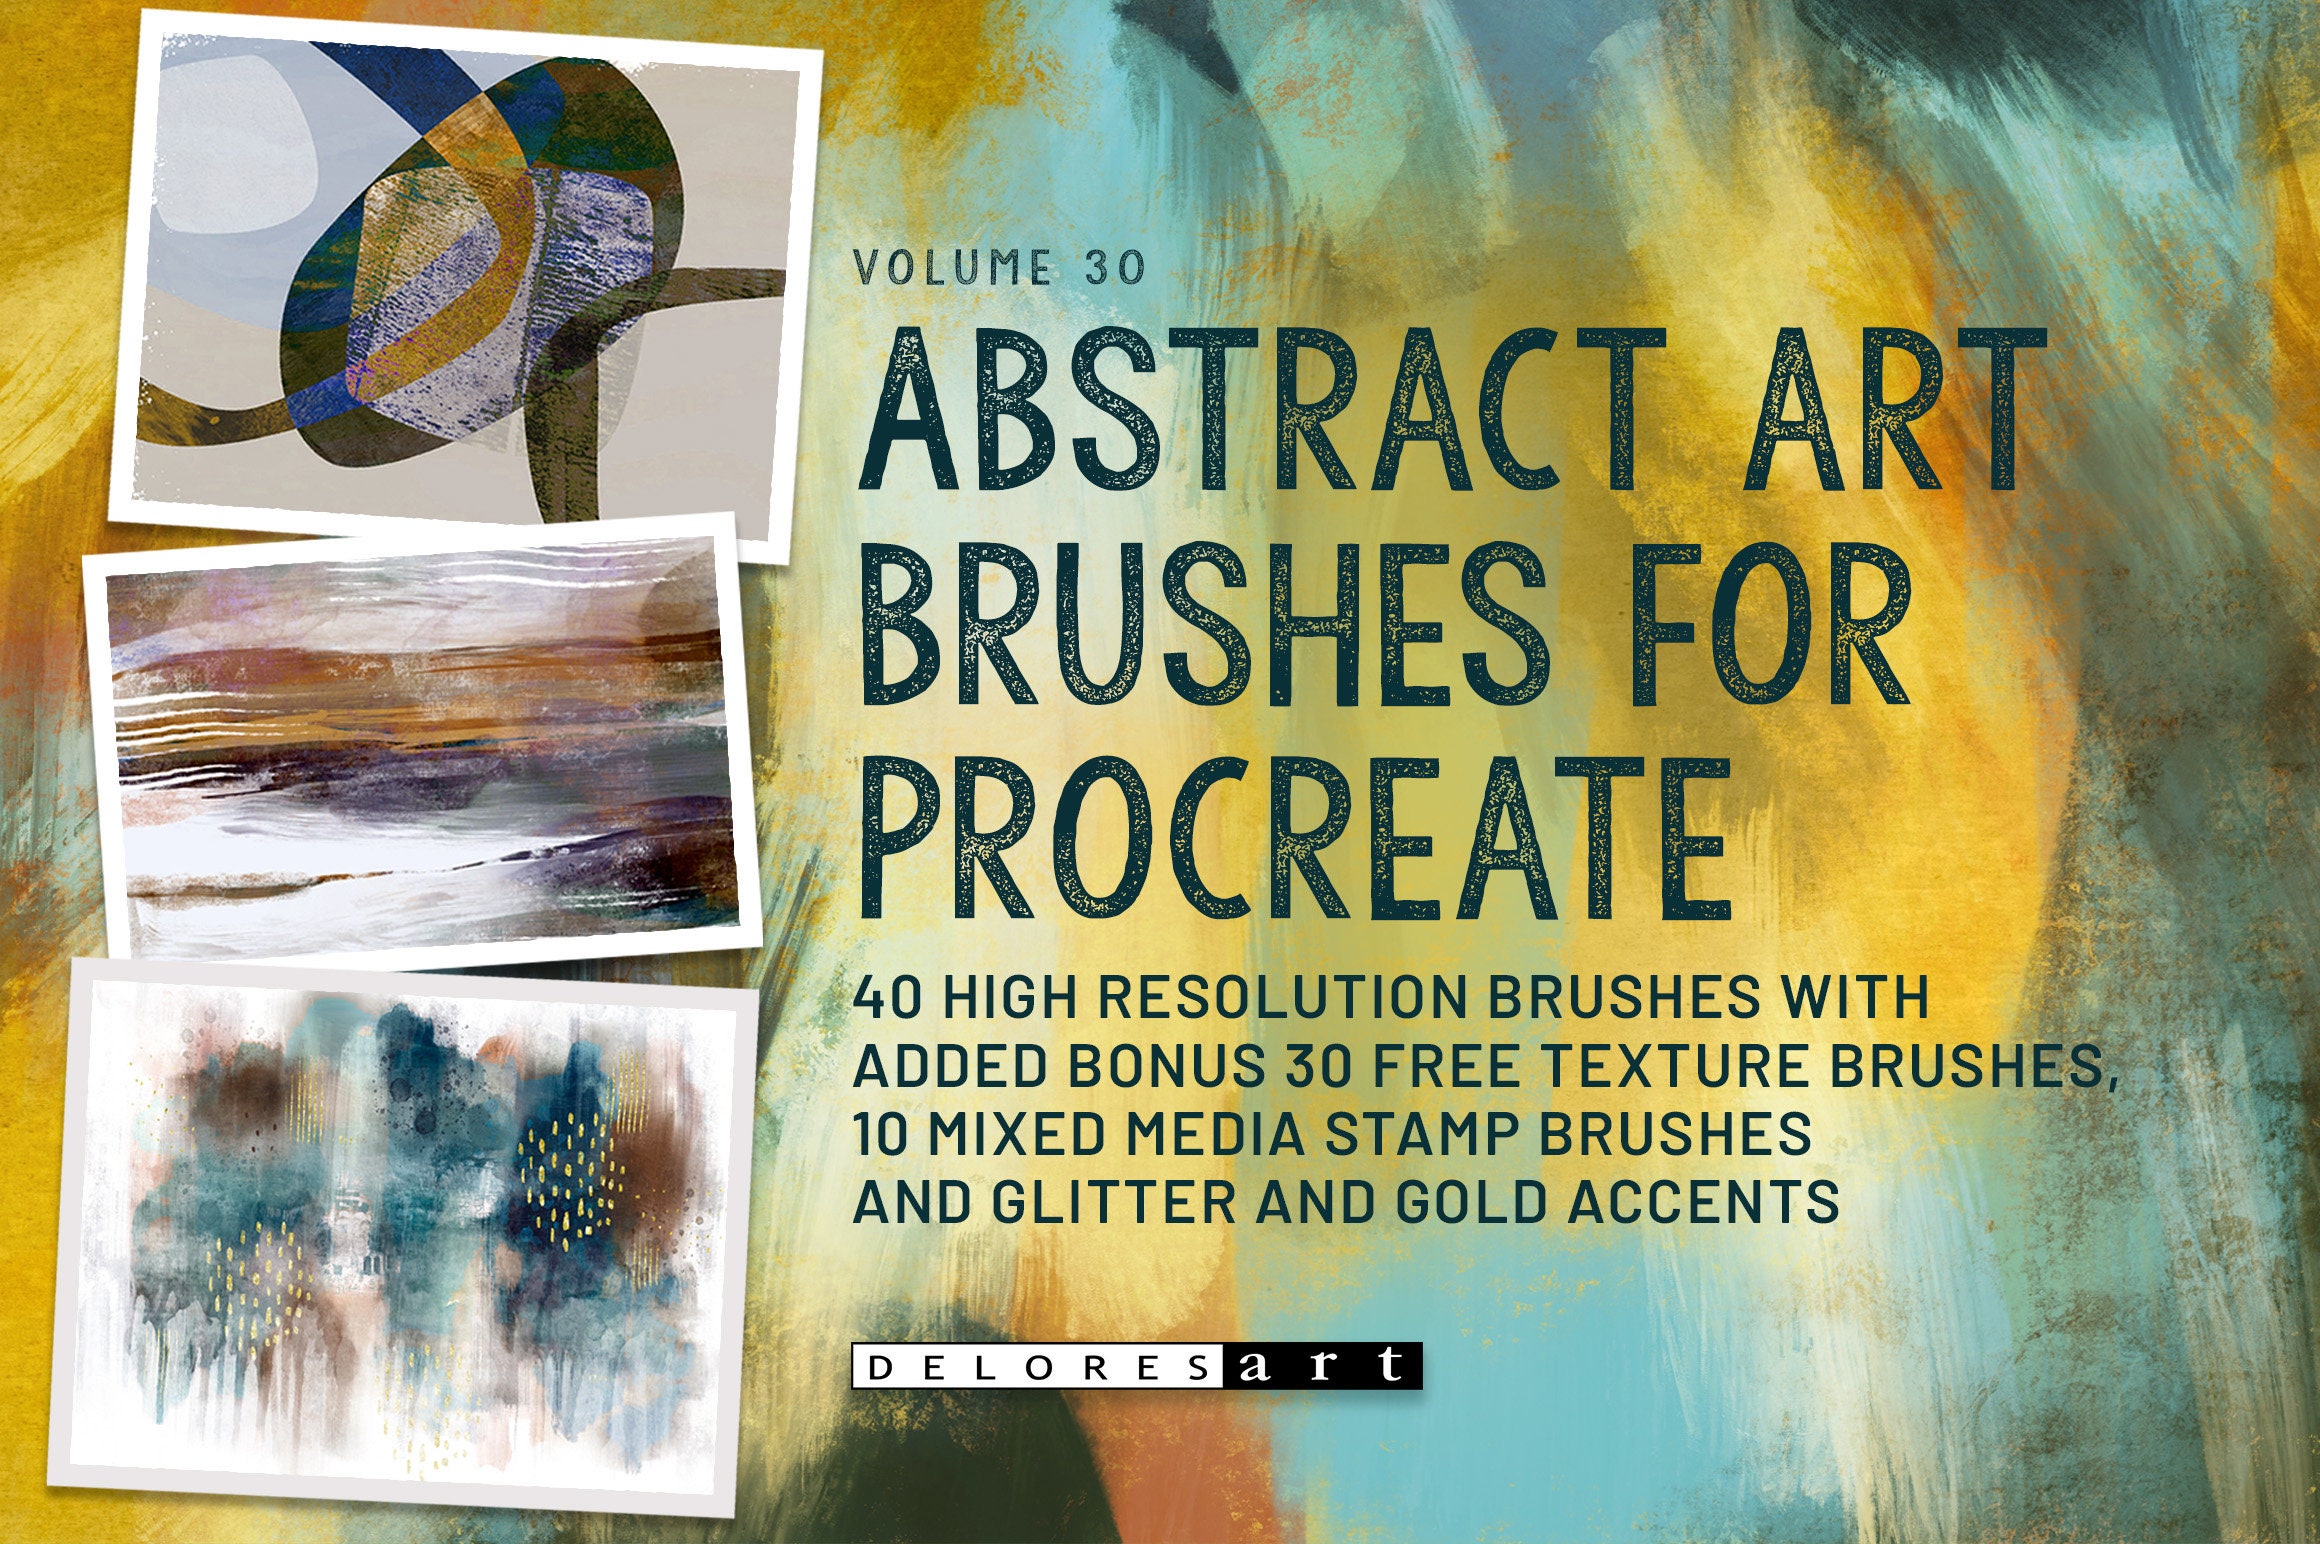 Art Paint Brushes for Acrylic Painting Watercolor Oil Gouache Body